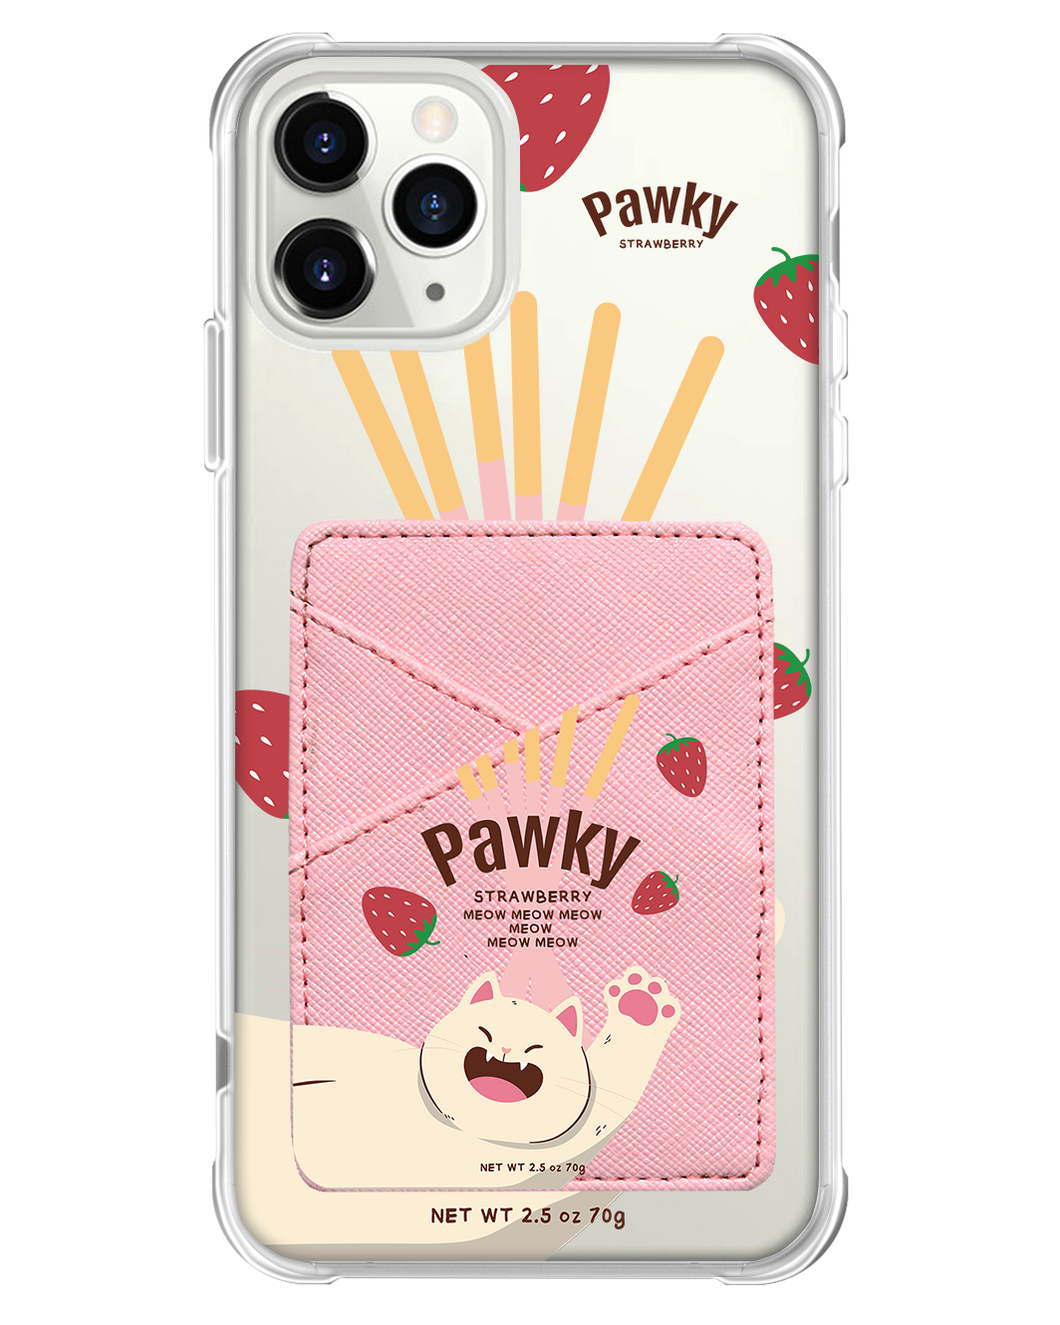 iPhone Phone Wallet Case - Pawky Cat